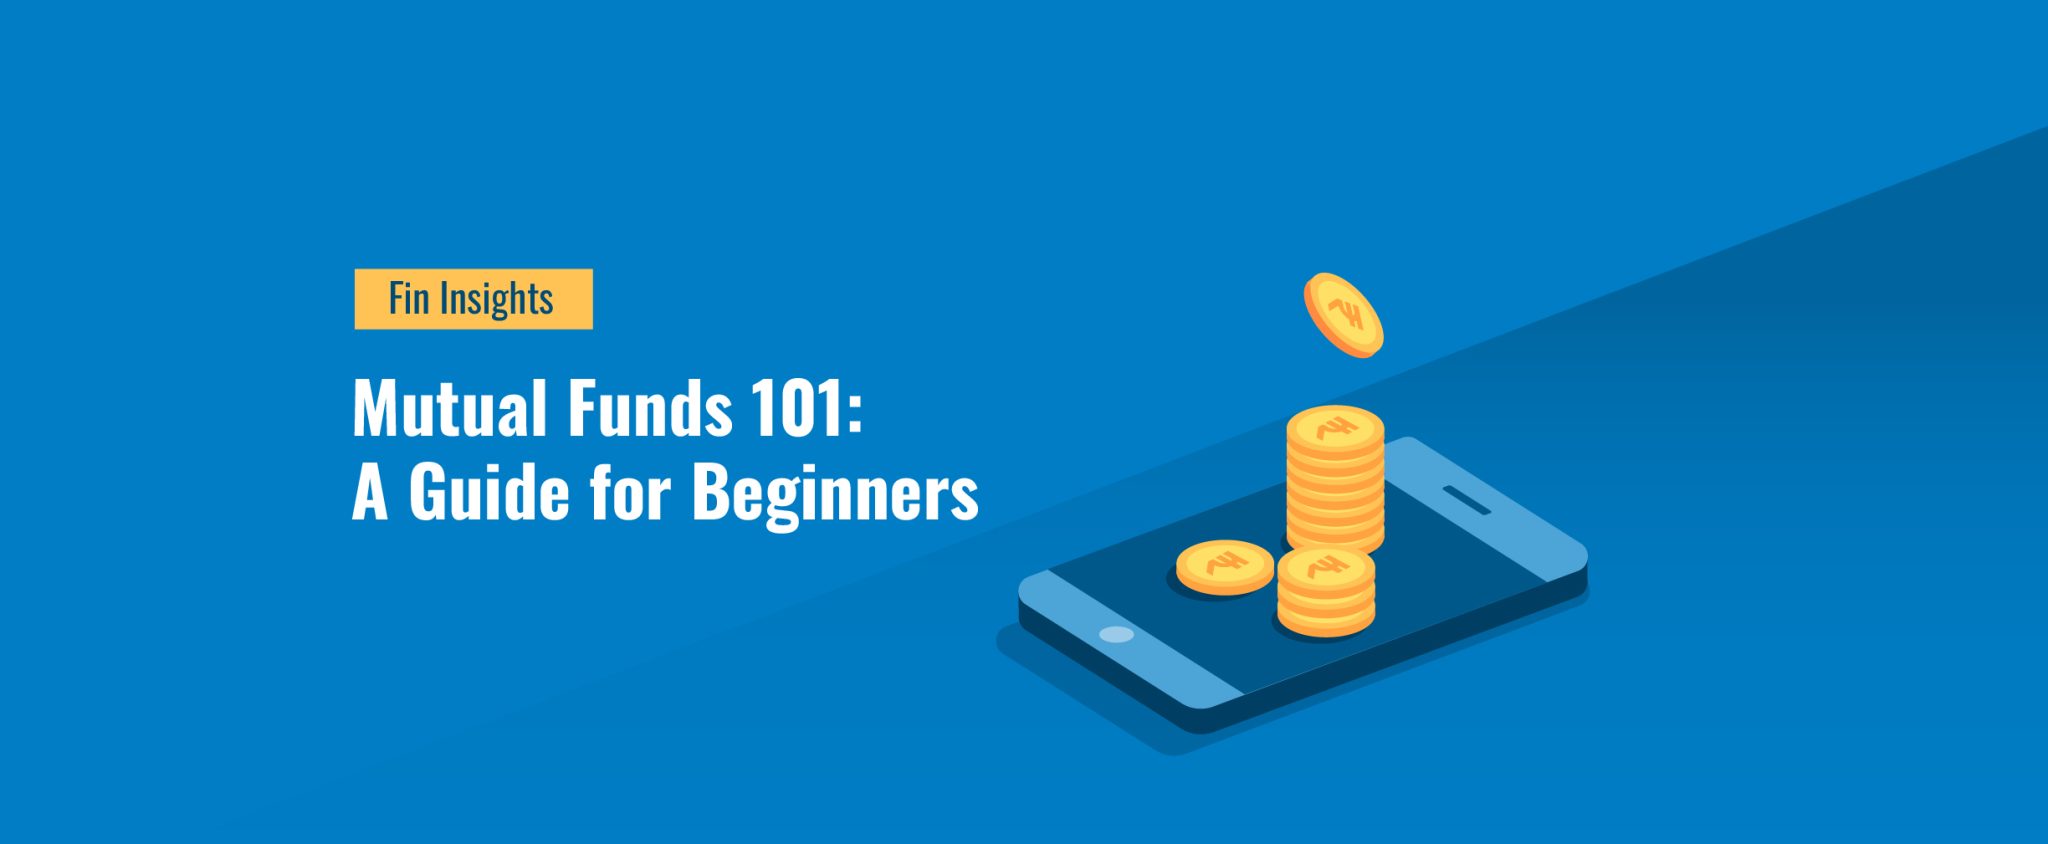 Mutual Funds 101: A Guide for Beginners